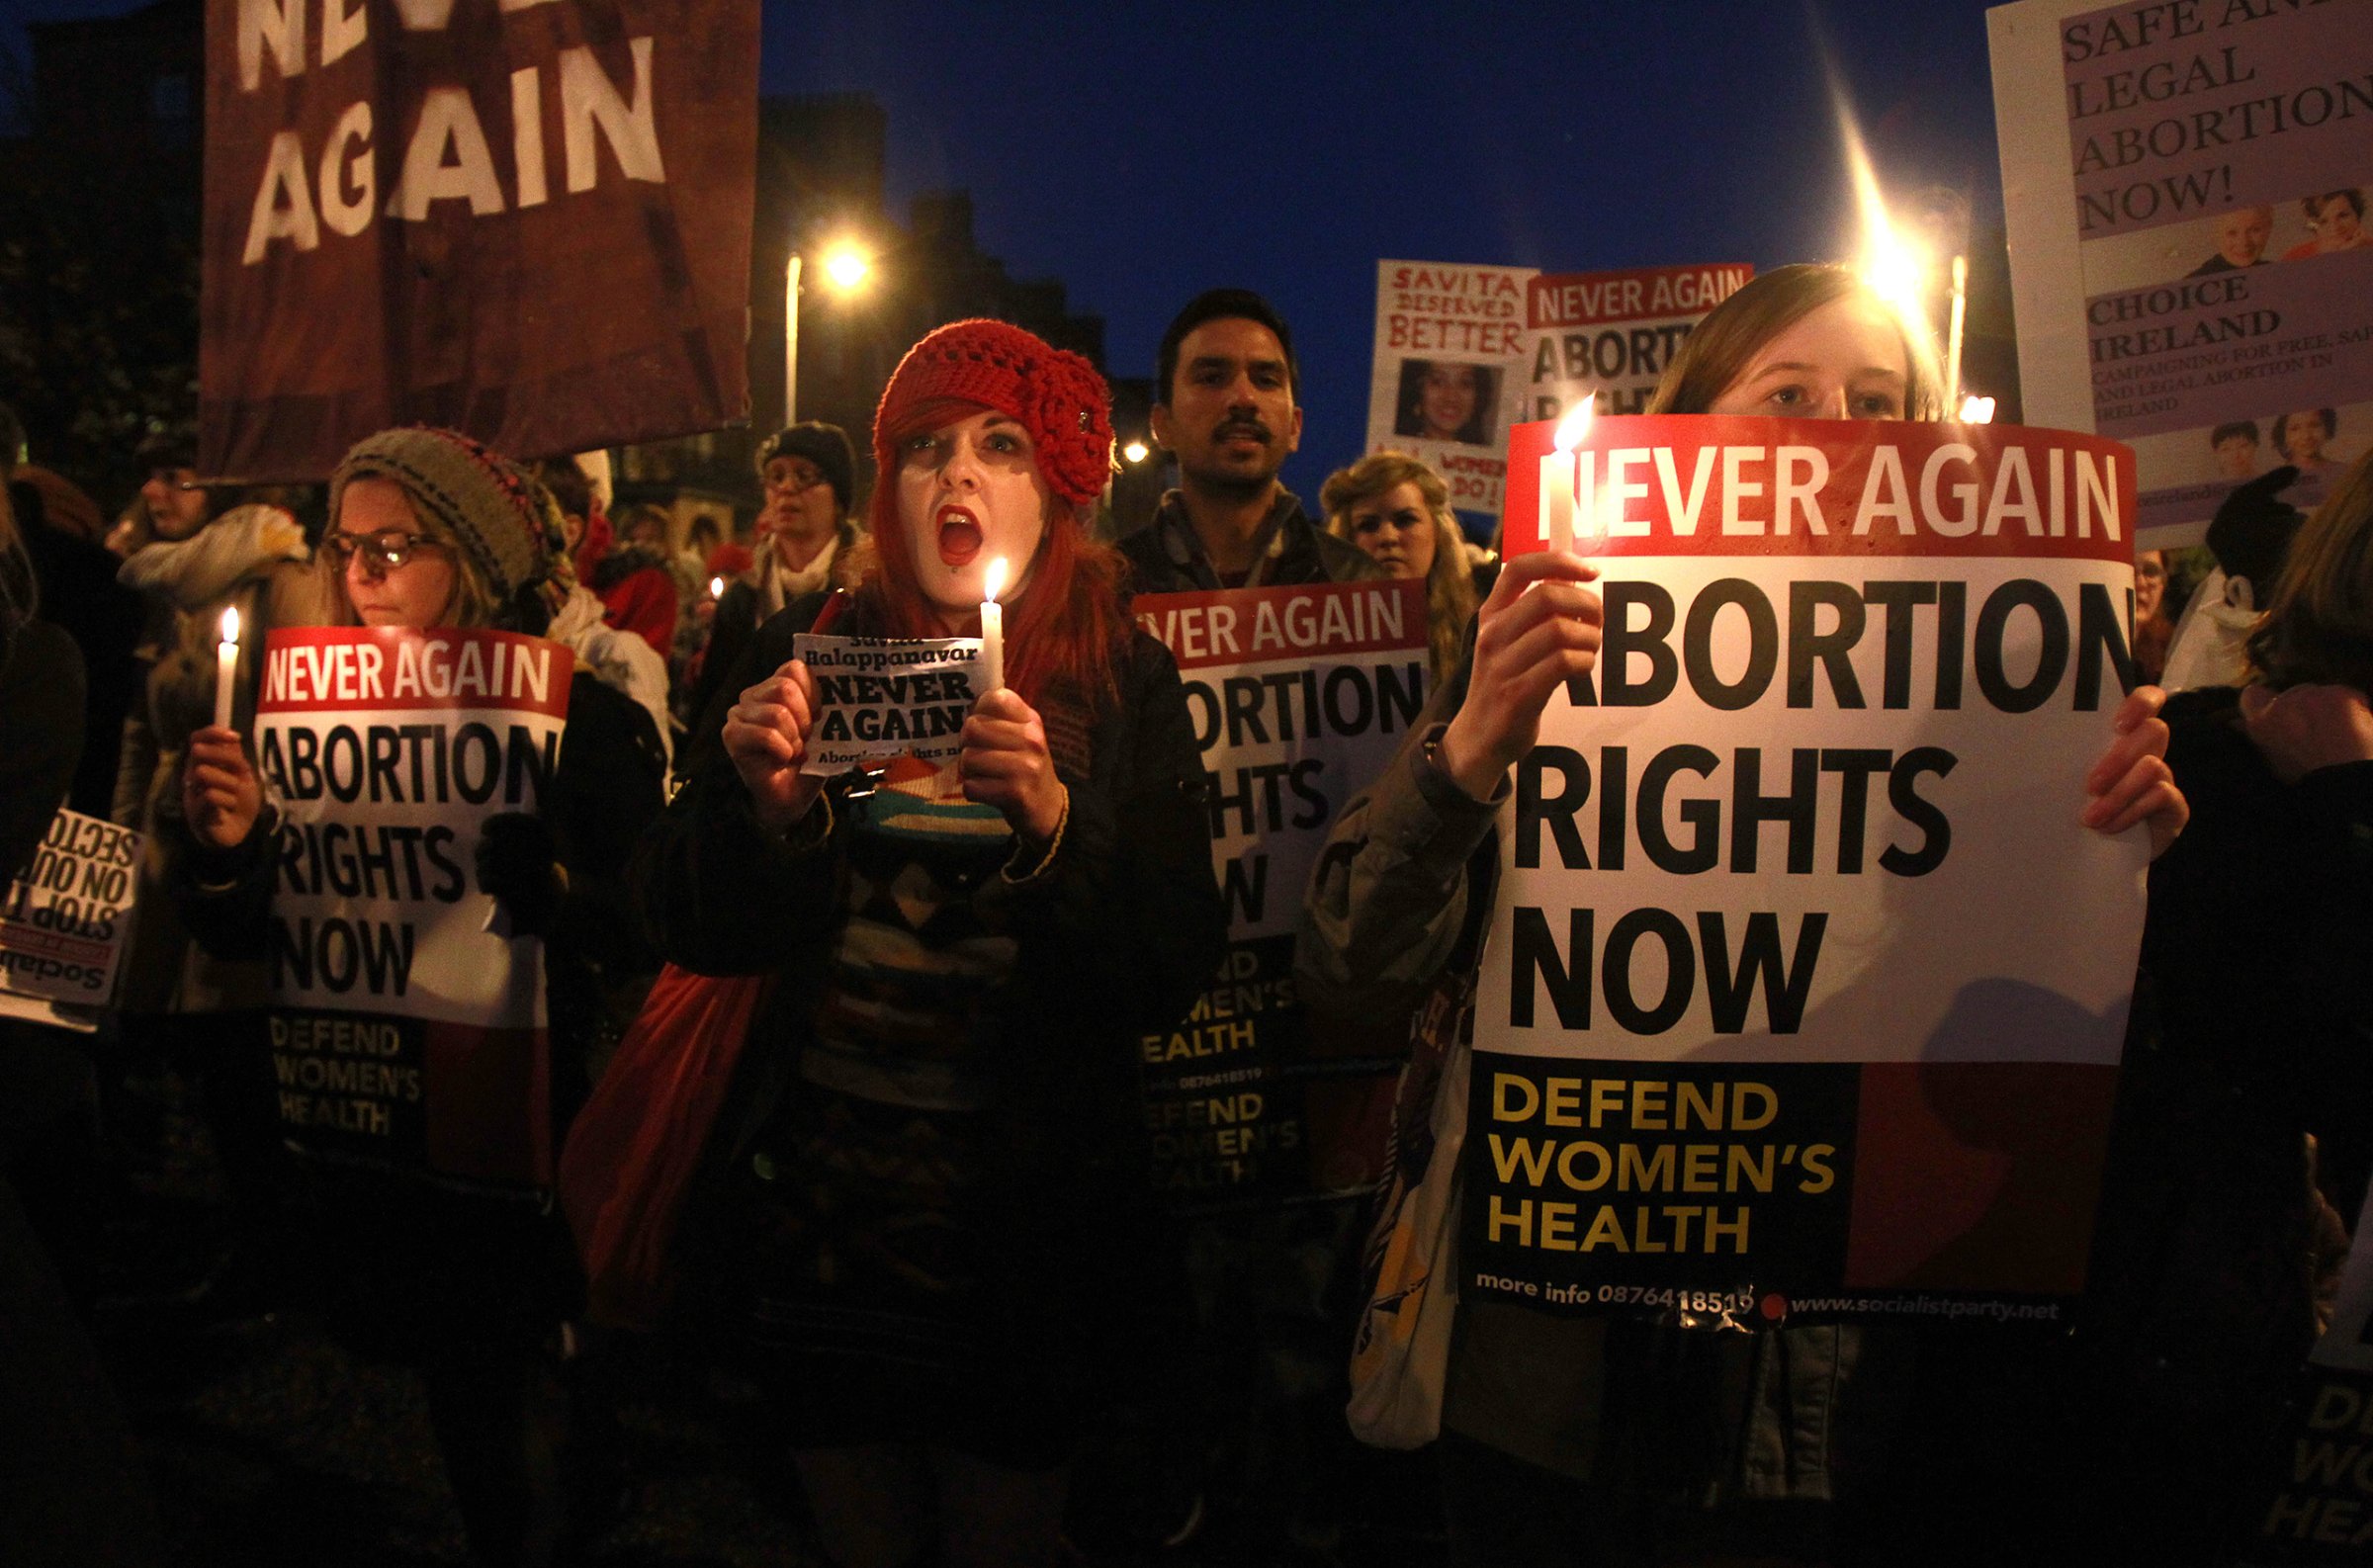 Demonstrators hold placards and candles in memory of Savita Halappanavar, whose doctors allegedly refused to perform an abortion because it was against the laws of the Catholic country, in Dublin on Nov. 17, 2012. The Indian woman, who was 17 weeks pregnant, repeatedly asked the hospital to terminate her pregnancy because she had severe back pain and was miscarrying, her family said.